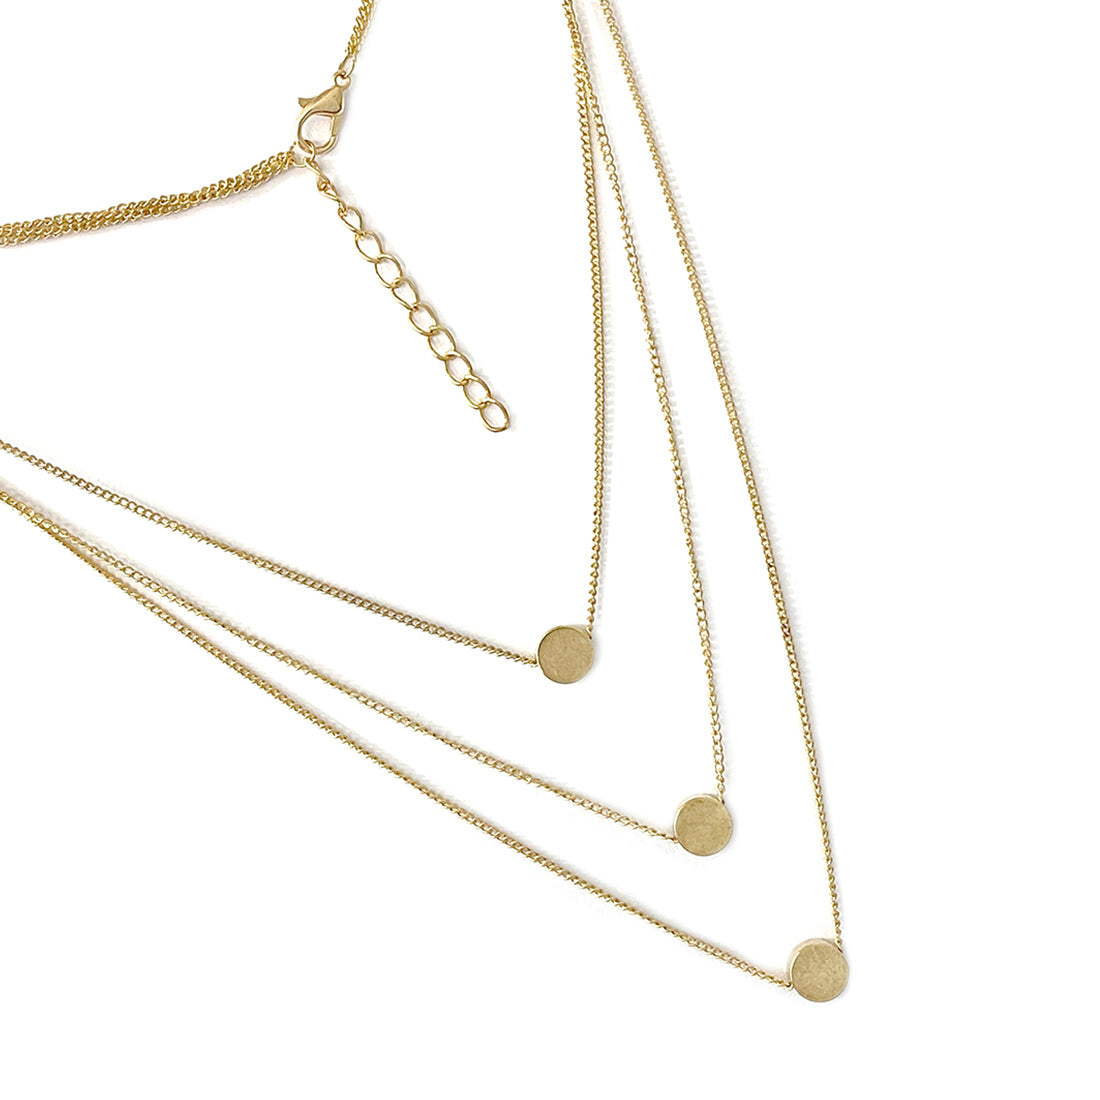 CIRCLE PENDANT STATEMENT GOLD-TONED LAYERED NECKLACE